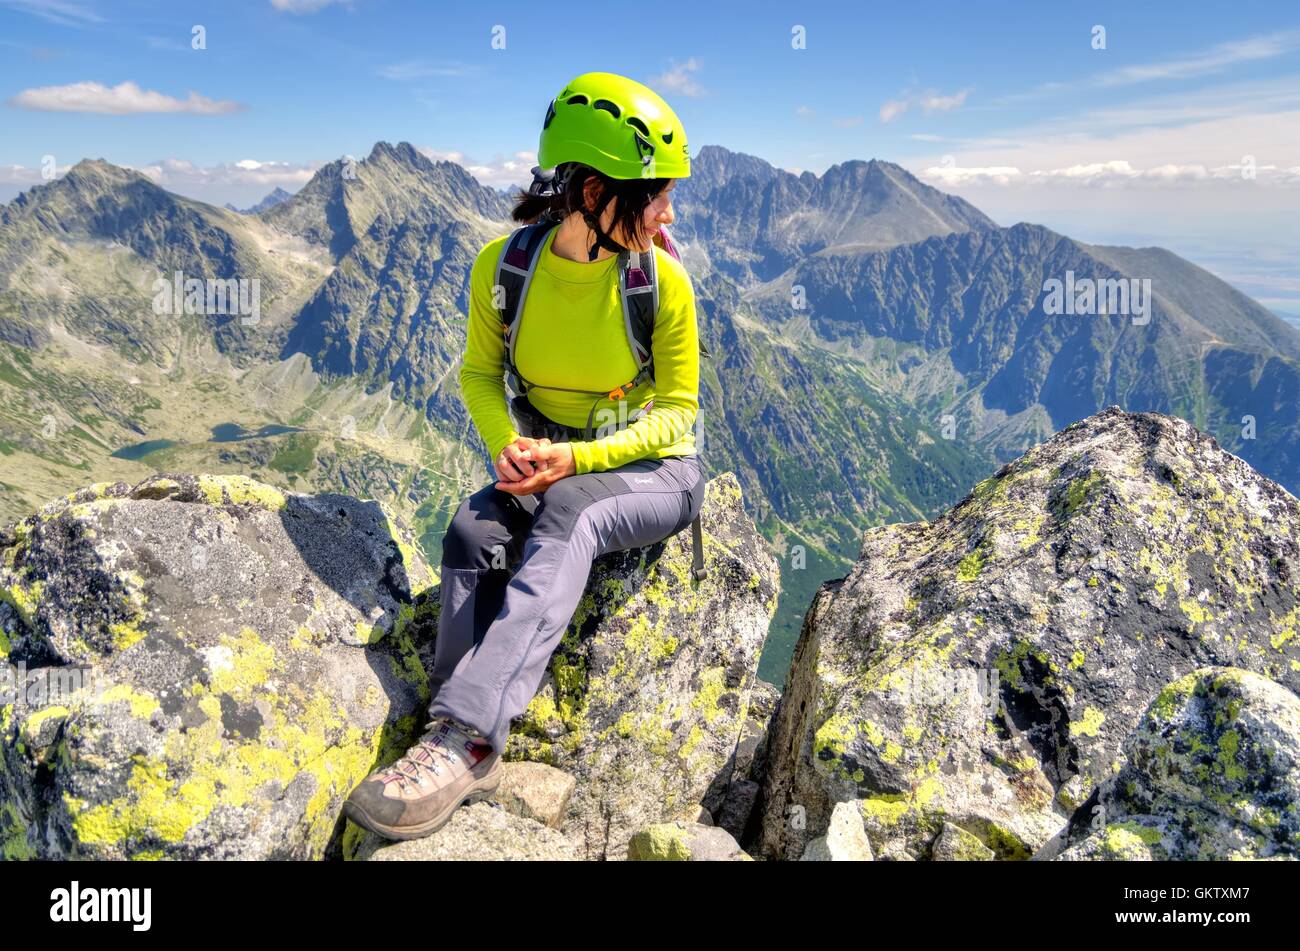 HIGH TATRA, SLOVAKIA - AUGUST 20, 2015: Tourist in the mountains. Young woman on the top admiring mountain views. Stock Photo